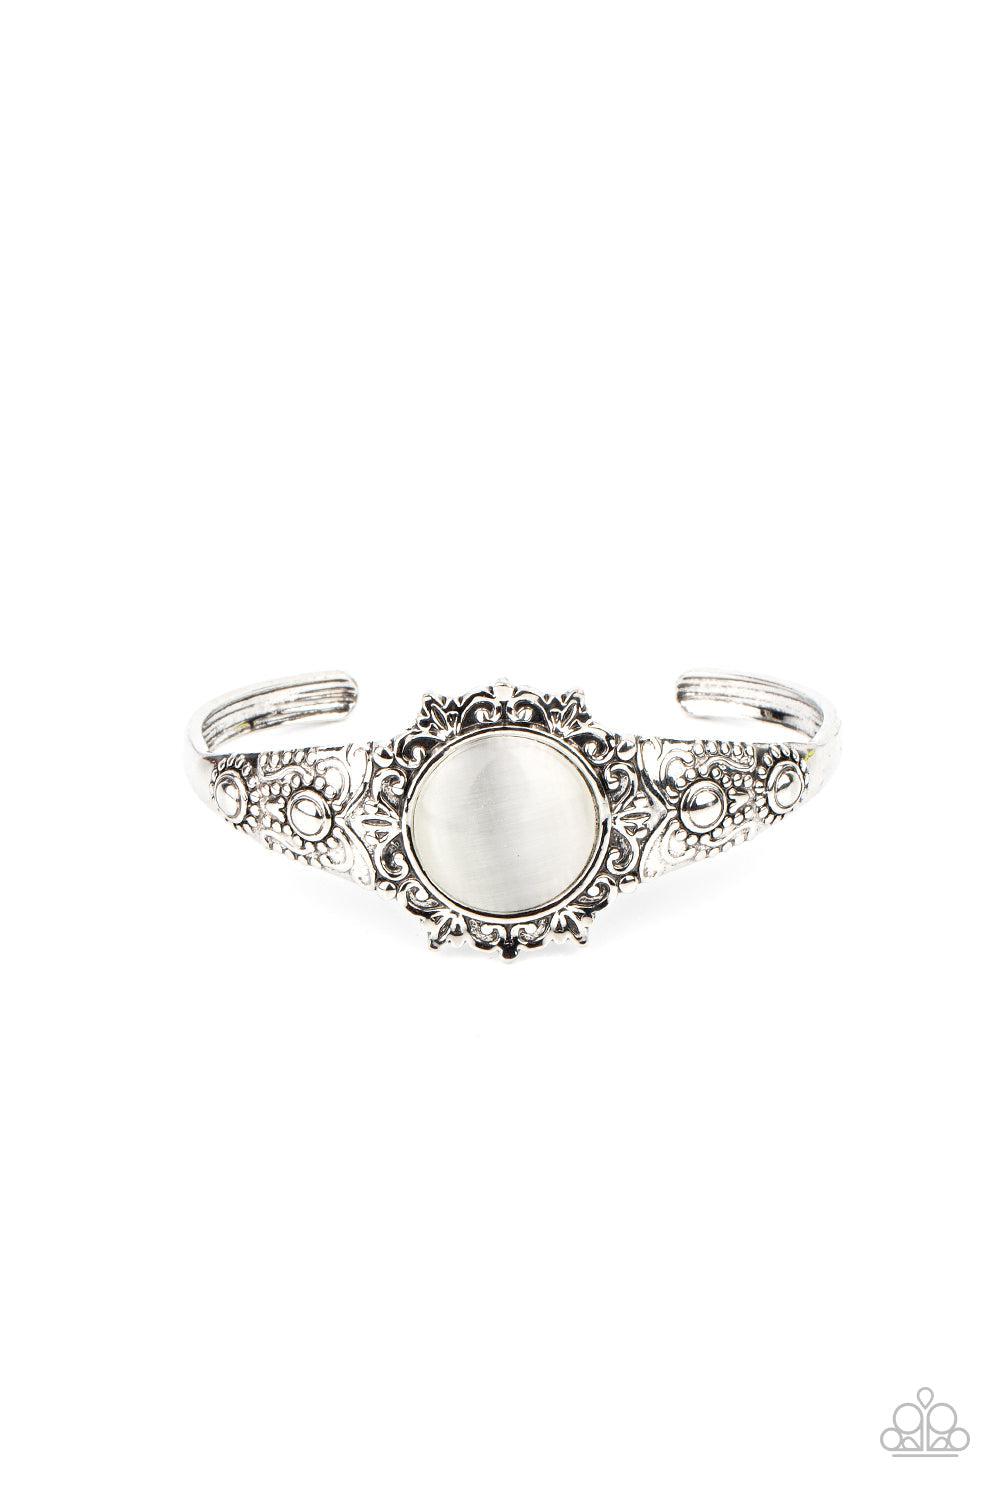 Extravagantly Enchanting White Cat's Eye Cuff Bracelet - Paparazzi Accessories- lightbox - CarasShop.com - $5 Jewelry by Cara Jewels